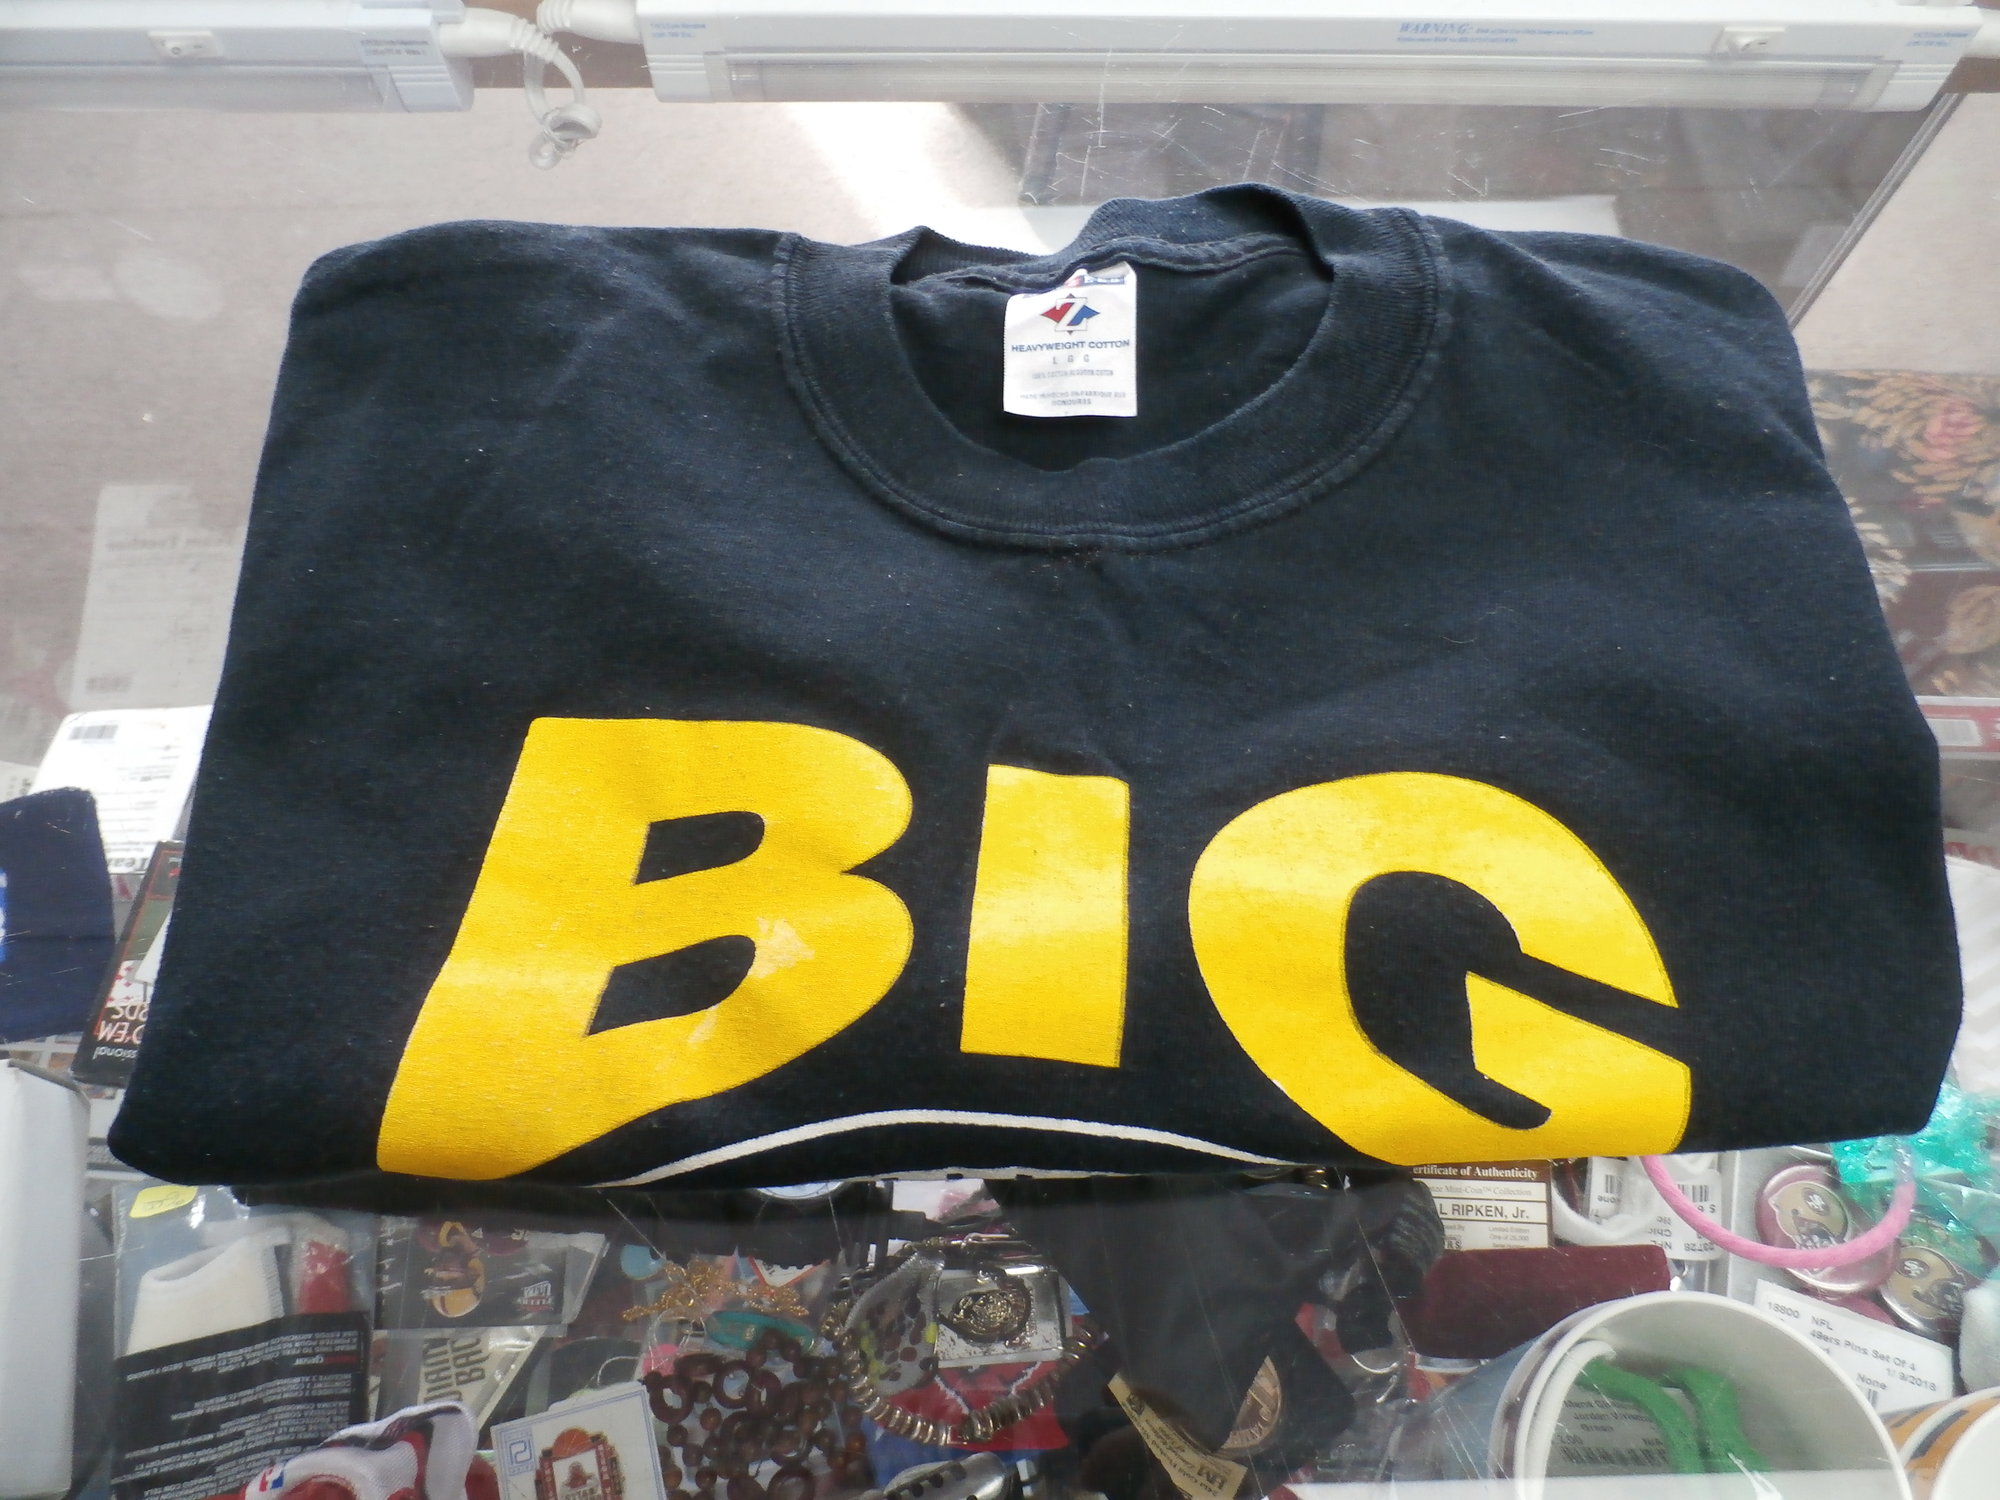 Jerzees Men's \"Big Ben\" (Steelers) Short sleeve shirt black size Large  #30107
Rating:   (see below) 3- Good Condition
Team: Pittsburgh Steelers
Player: Big Ben
Brand: Jerzees
Size: Men's - Large (Measured Flat: Across chest 20\", length 28\")
Measured flat: armpit to armpit; top of shoulder to the hem
Color: Black
Style: Short Sleeve Shirt Screen pressed;
Material: 100% Cotton
Condition: 3- Good Condition - wrinkled;  pilling and fuzz; there is a slight color blotch in the B of big;
Item #: 30107
Shipping: FREE